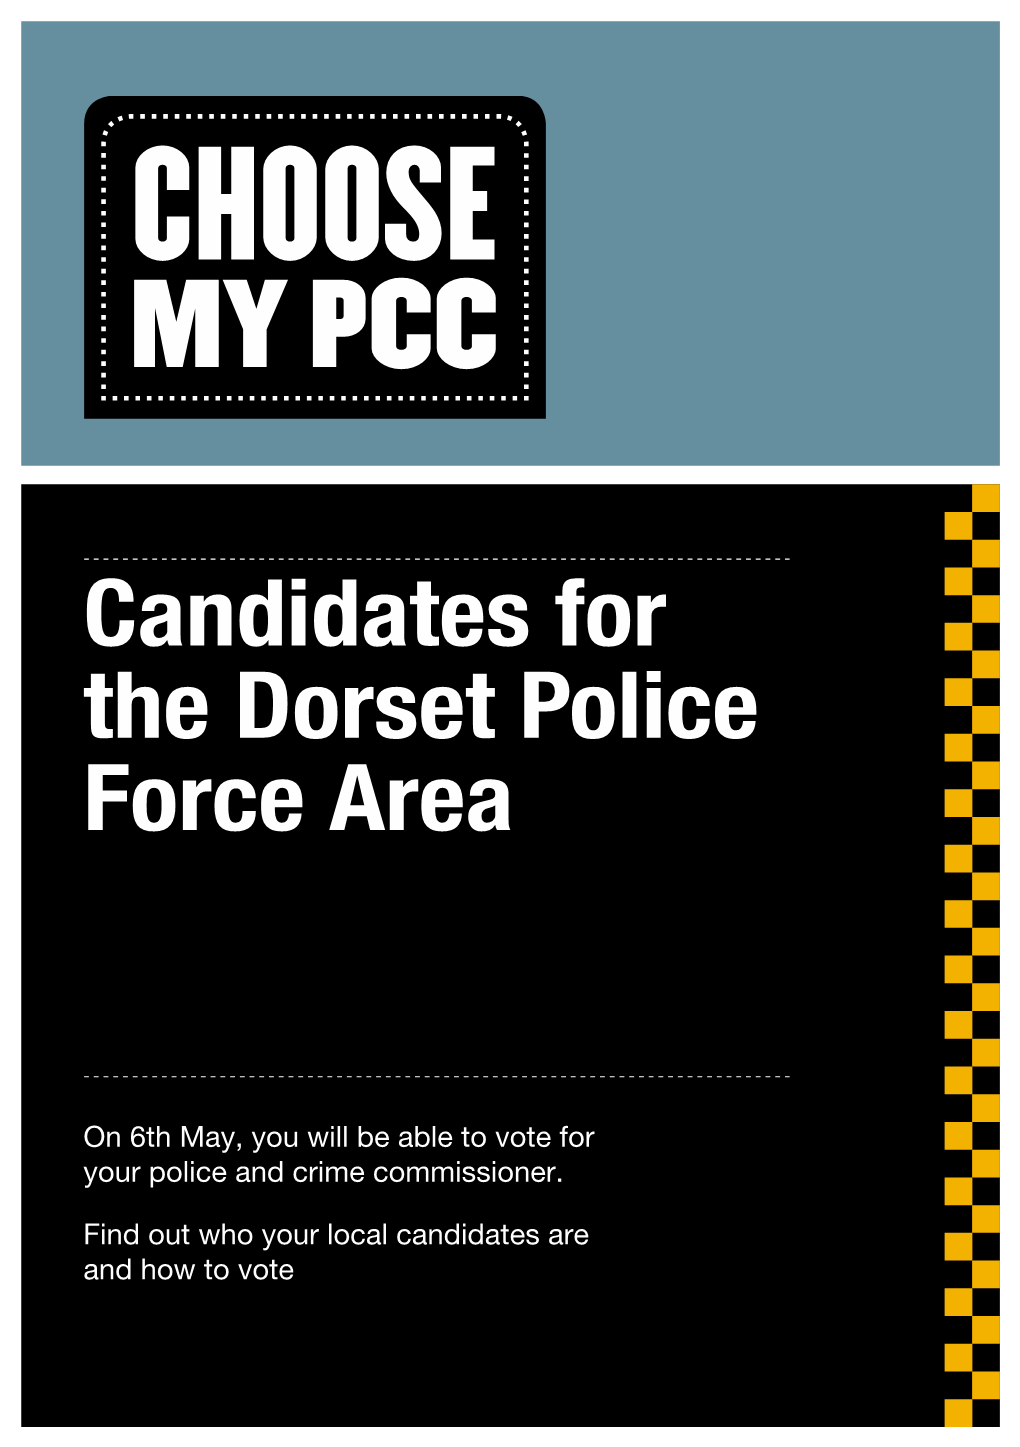 Candidates for the Dorset Police Force Area